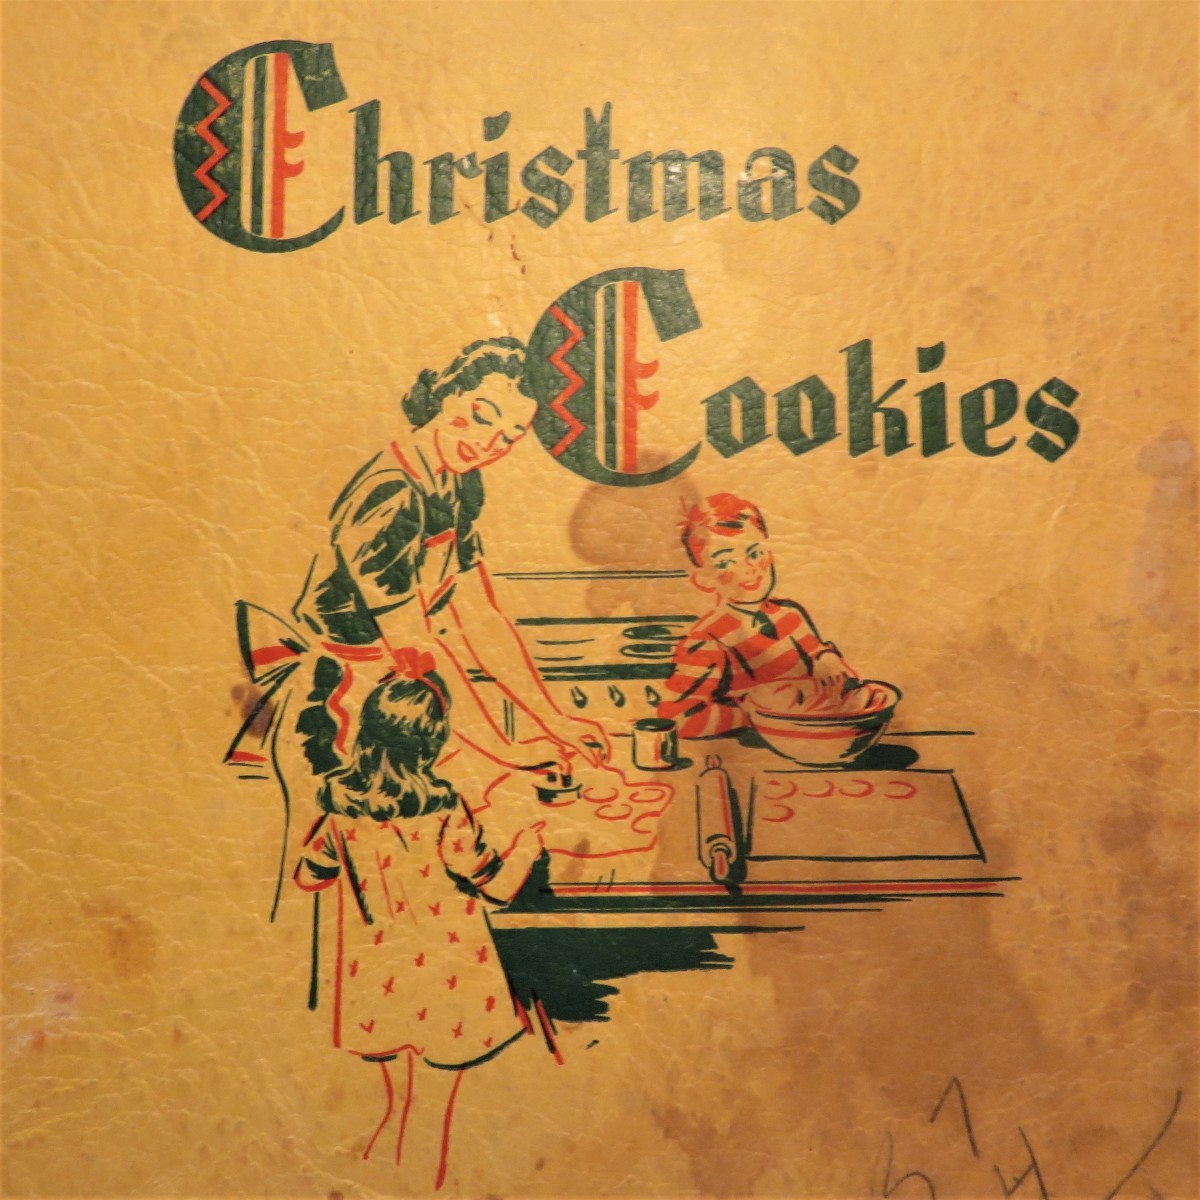 Cropped portion of the cover of this 1939 Christmas cookies booklet